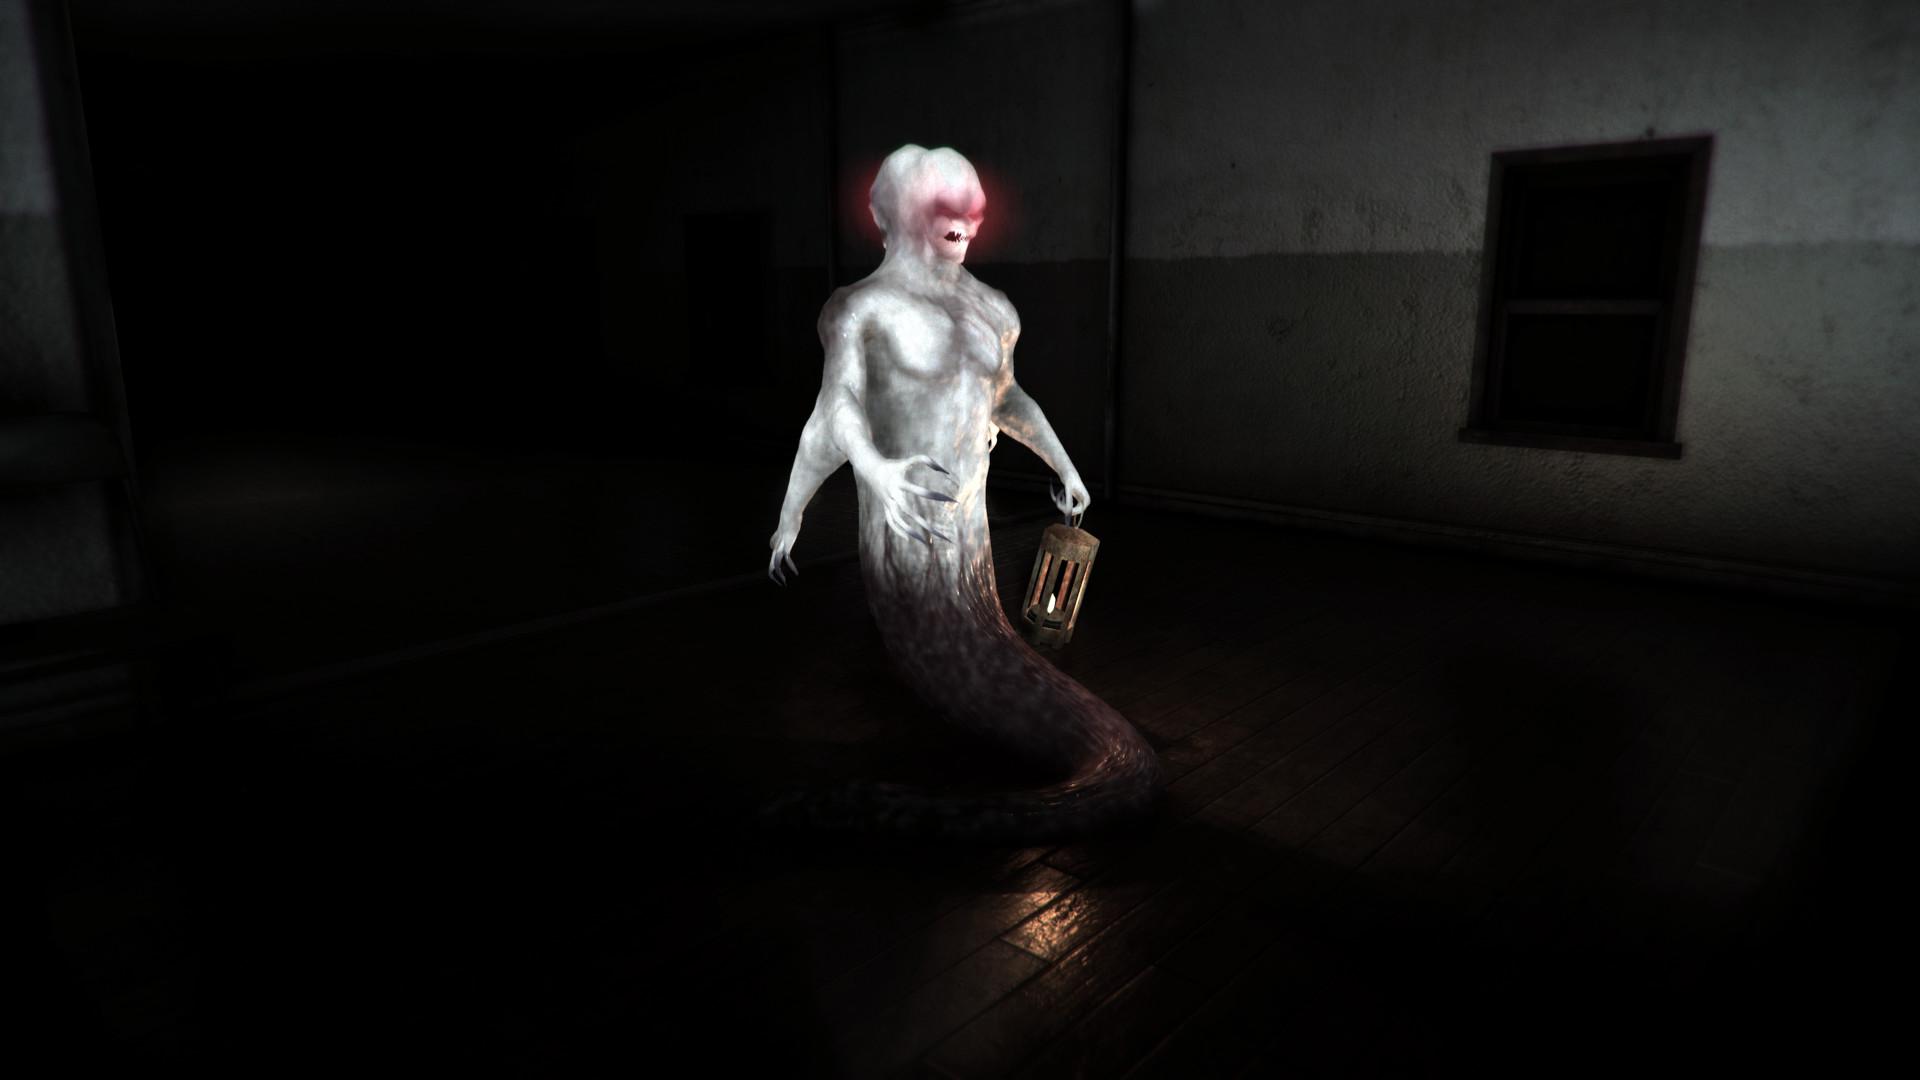 Screenshot №4 from game Insane Decay of Mind: The Labyrinth